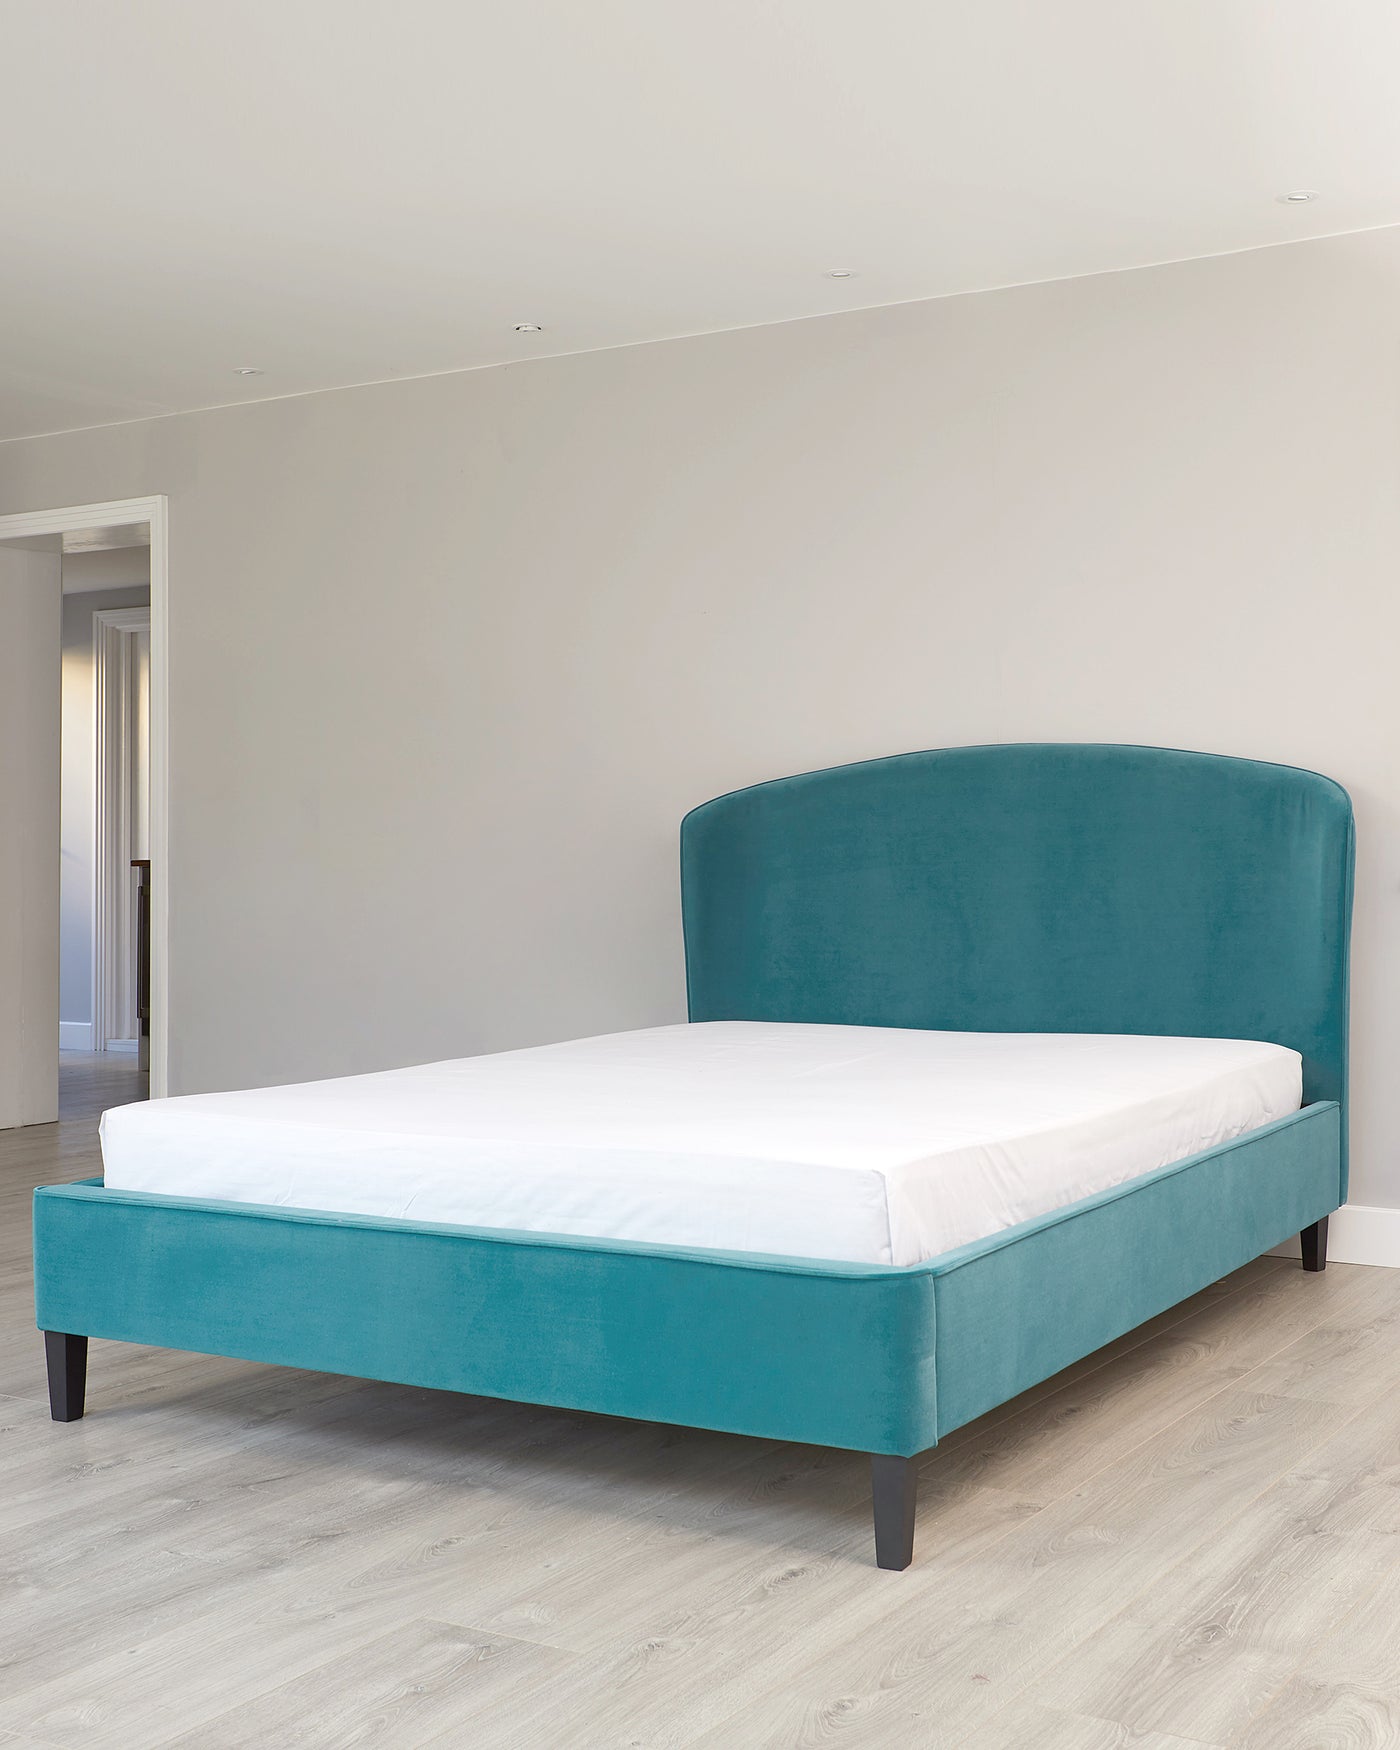 A modern teal upholstered platform bed with a curved headboard and dark wooden legs, showcasing a simplistic design ideal for contemporary bedrooms. The bed is dressed with a plain white mattress, emphasizing clean lines and a minimalist aesthetic.